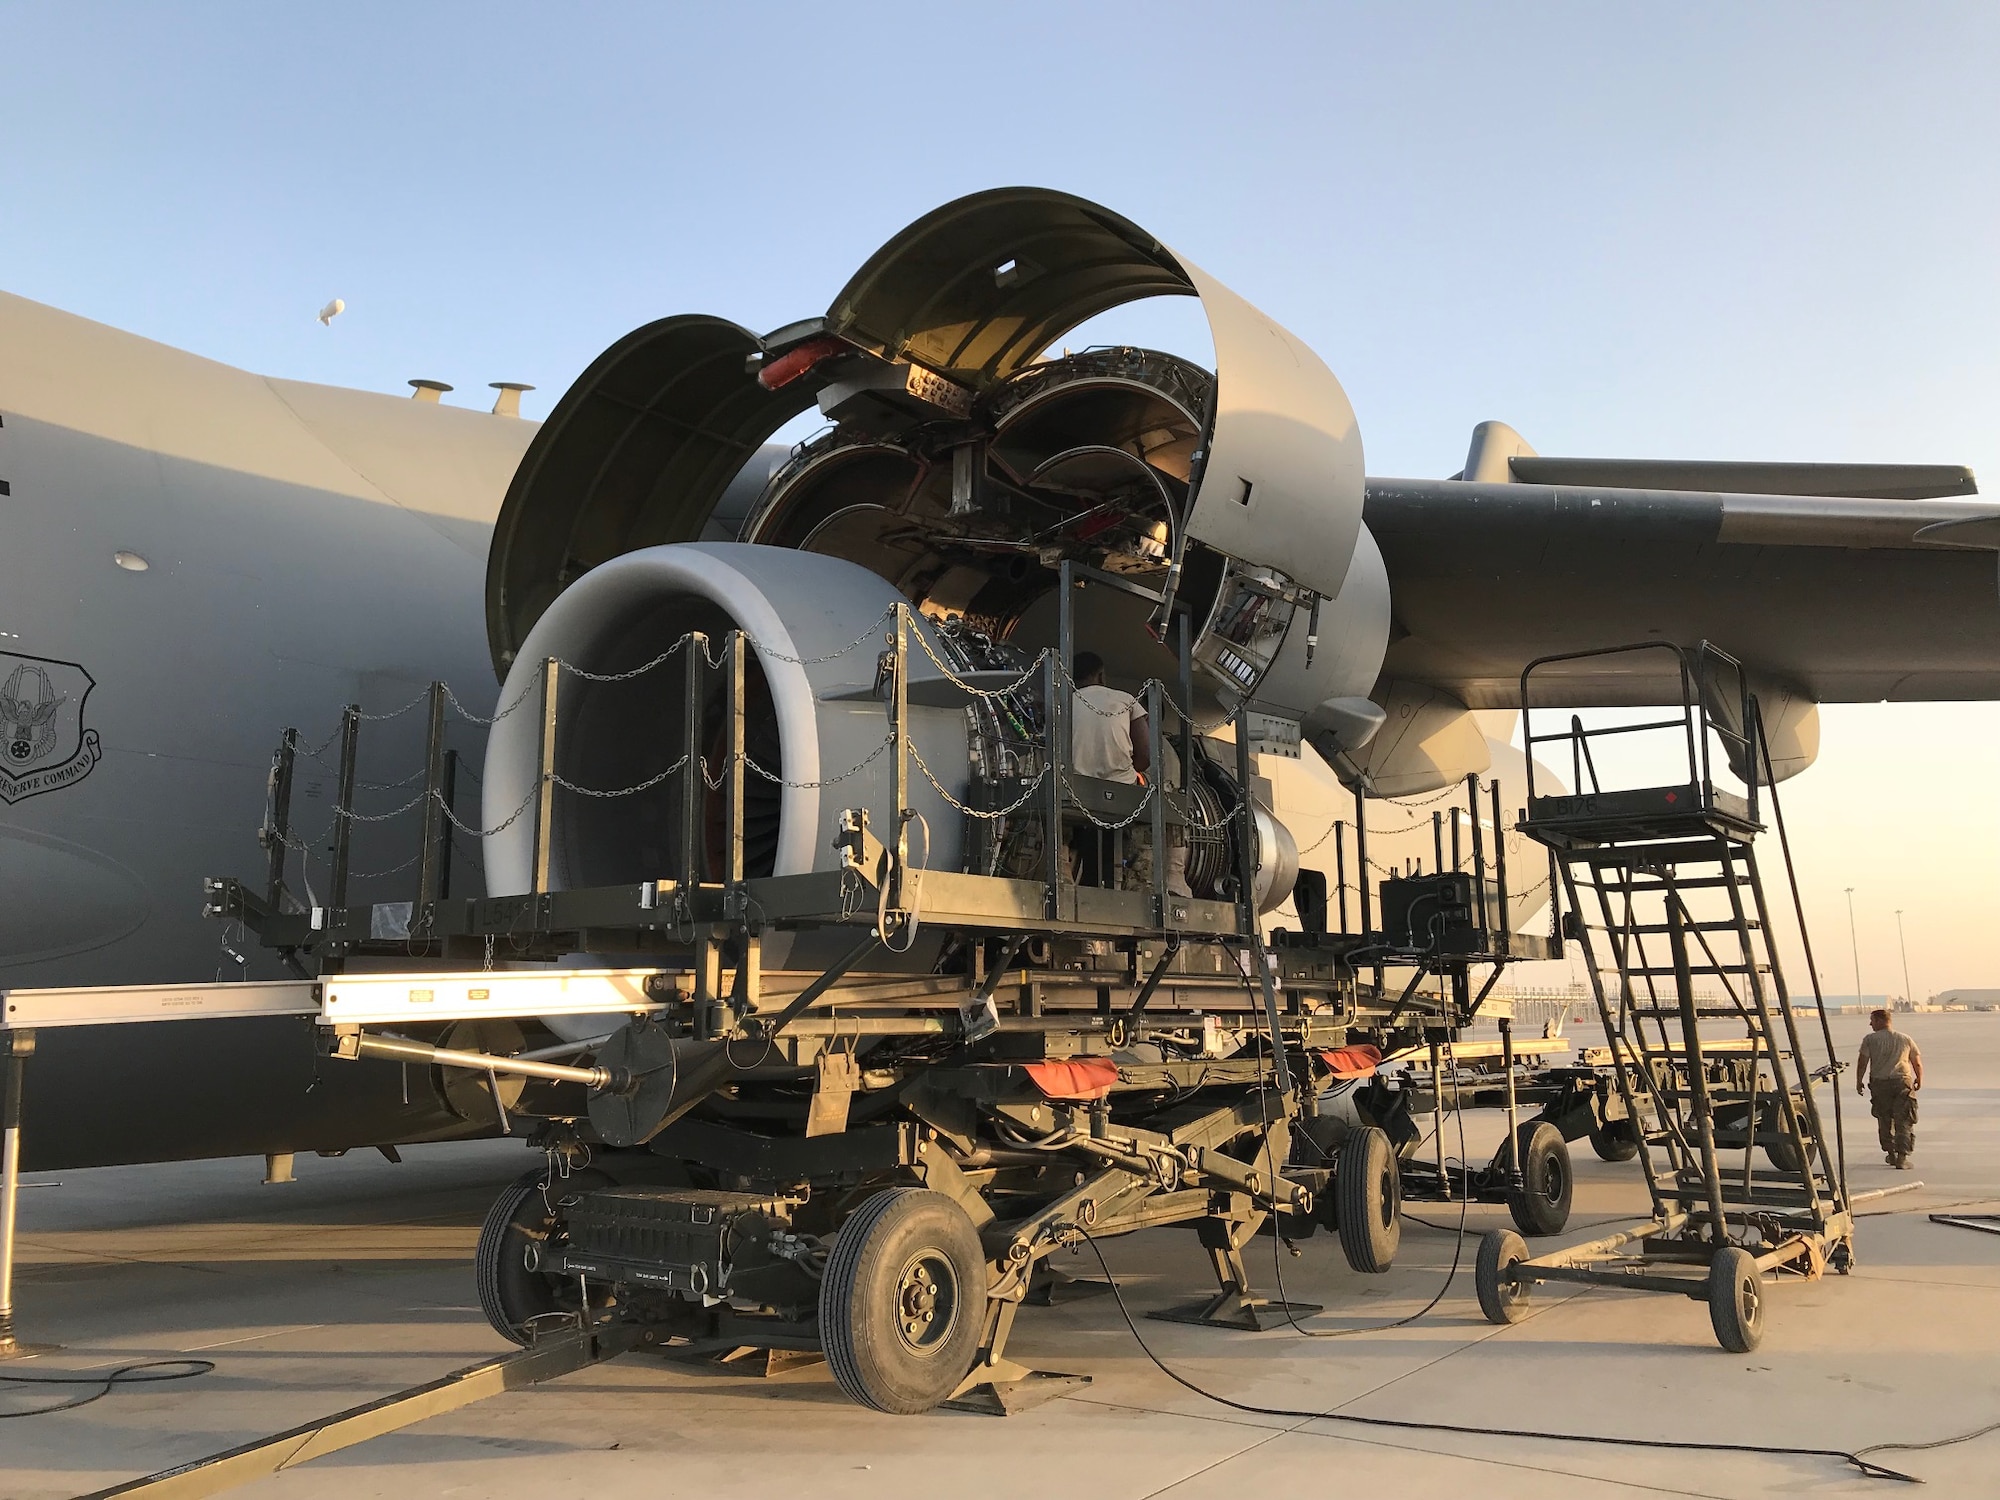 A team of en route maintenance Airmen converged from multiple locations to respond as part of a Maintenance Recovery Team, returning a C-17 Globemaster III aircraft back to the mobility fleet from a forward deployed location in Southwest Asia.